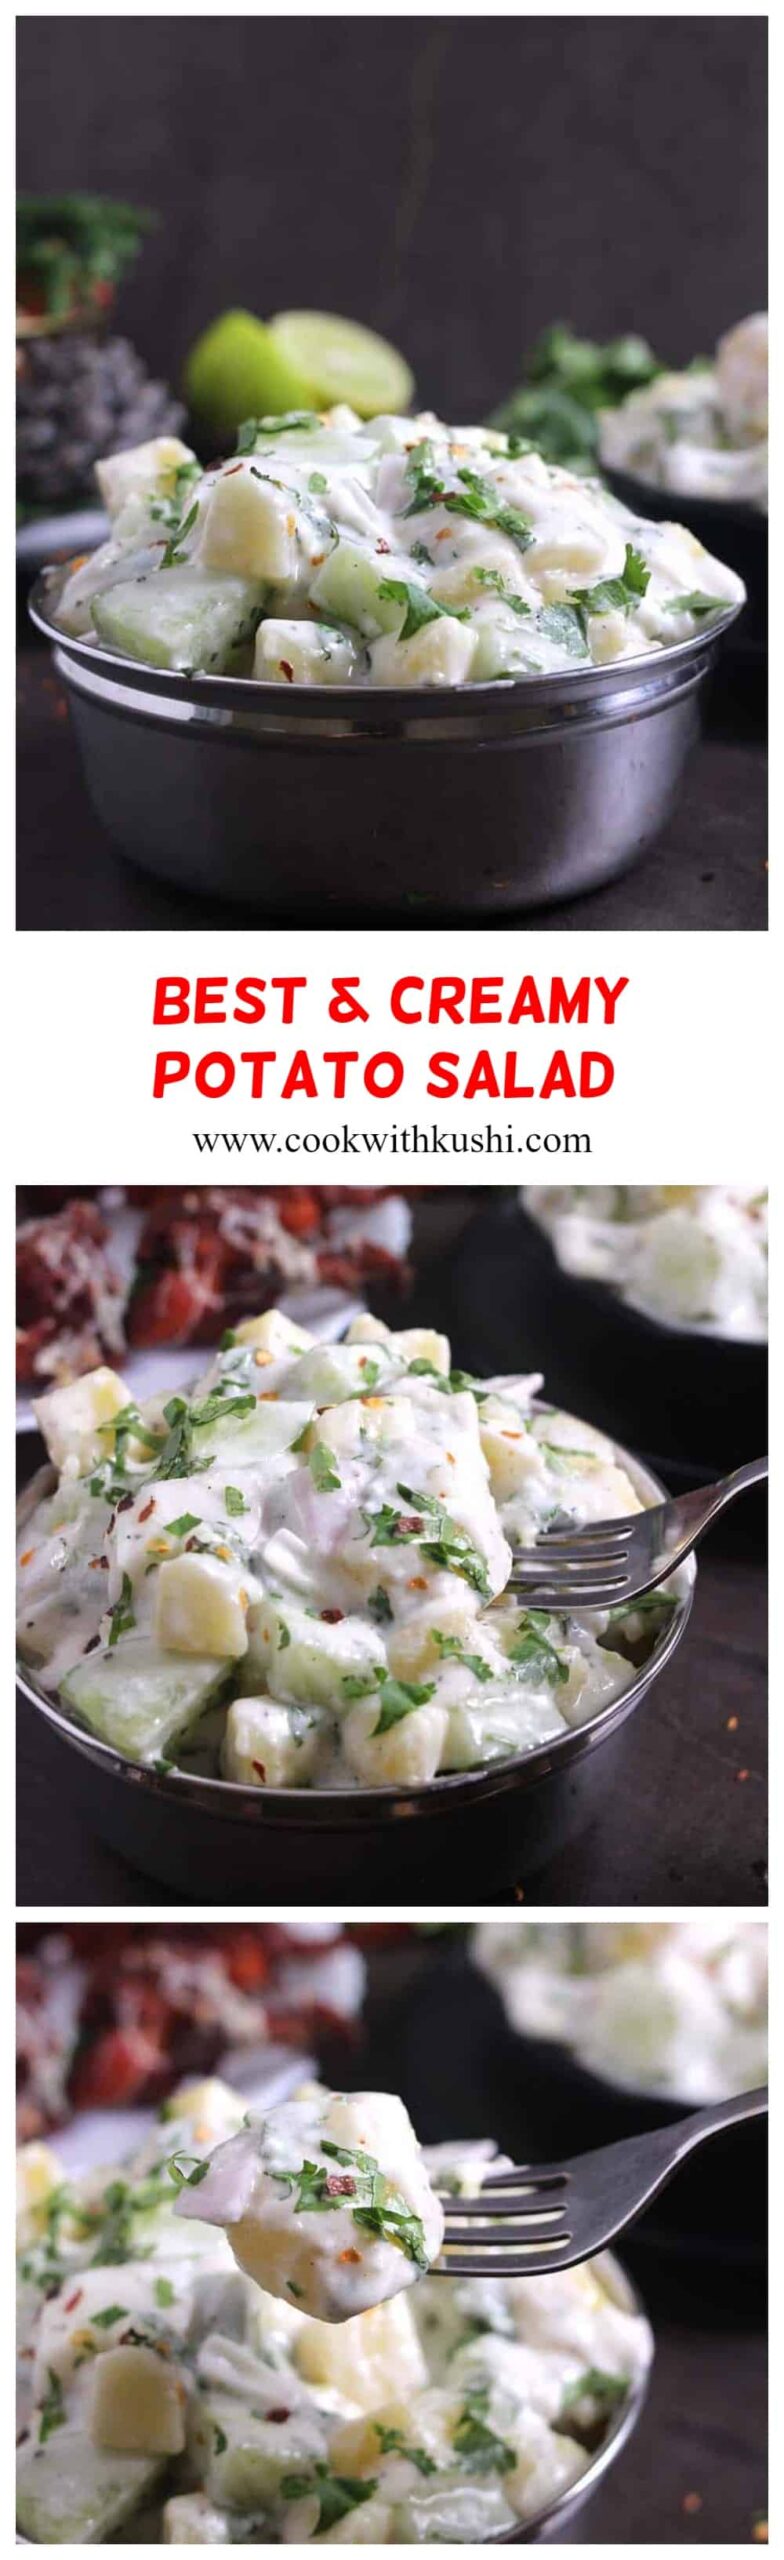 how to make the best & creamy potato salad recipe, side dishes with potatoes, mayonnaise dressing